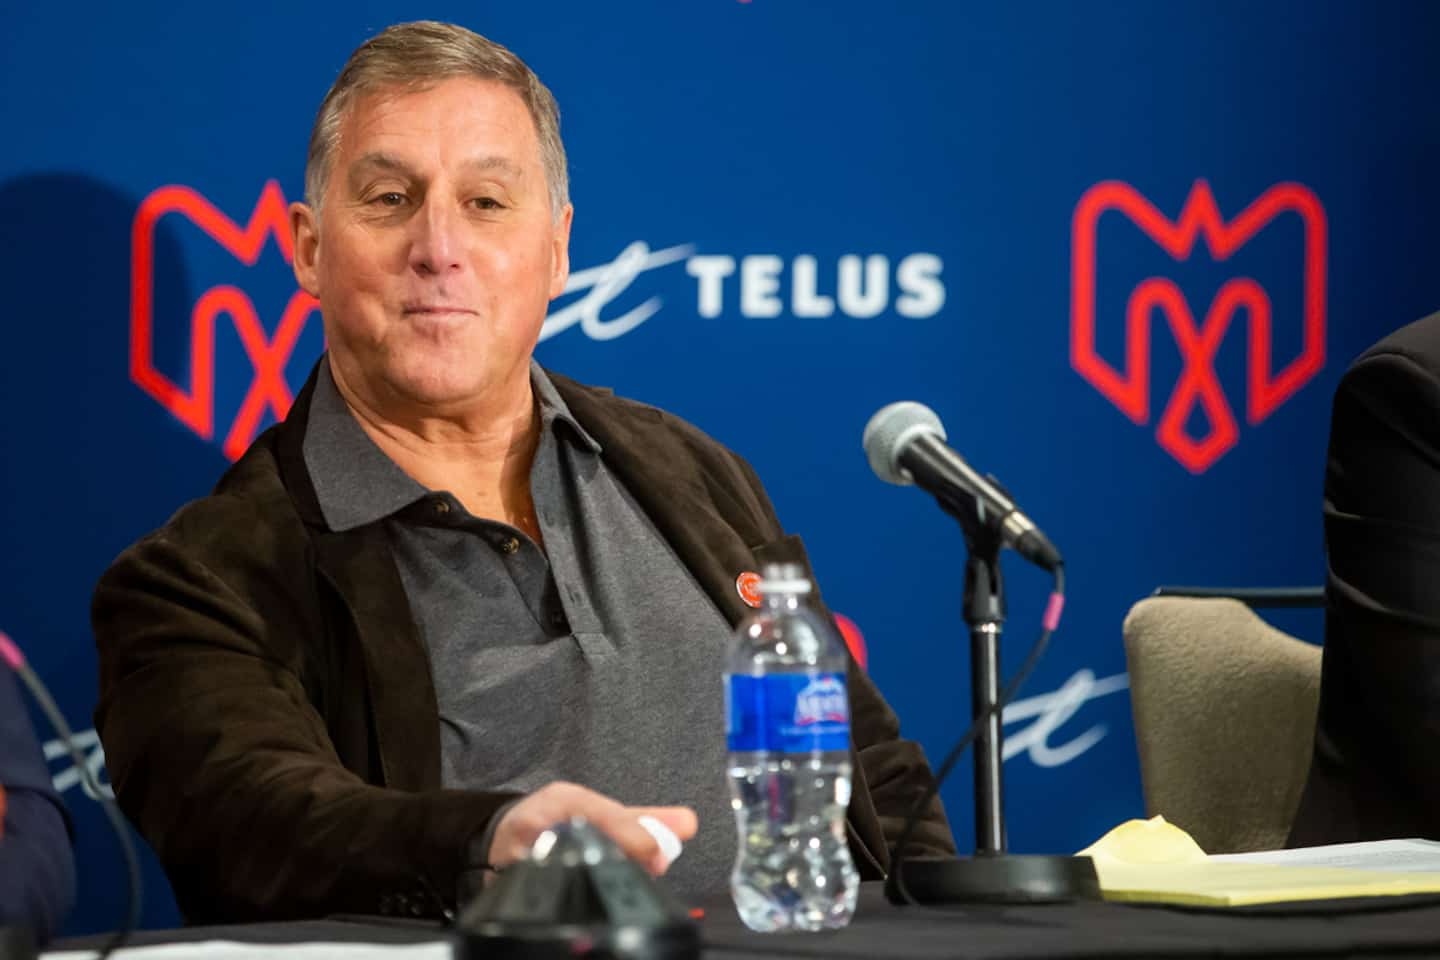 Alouettes: a very active owner on Twitter